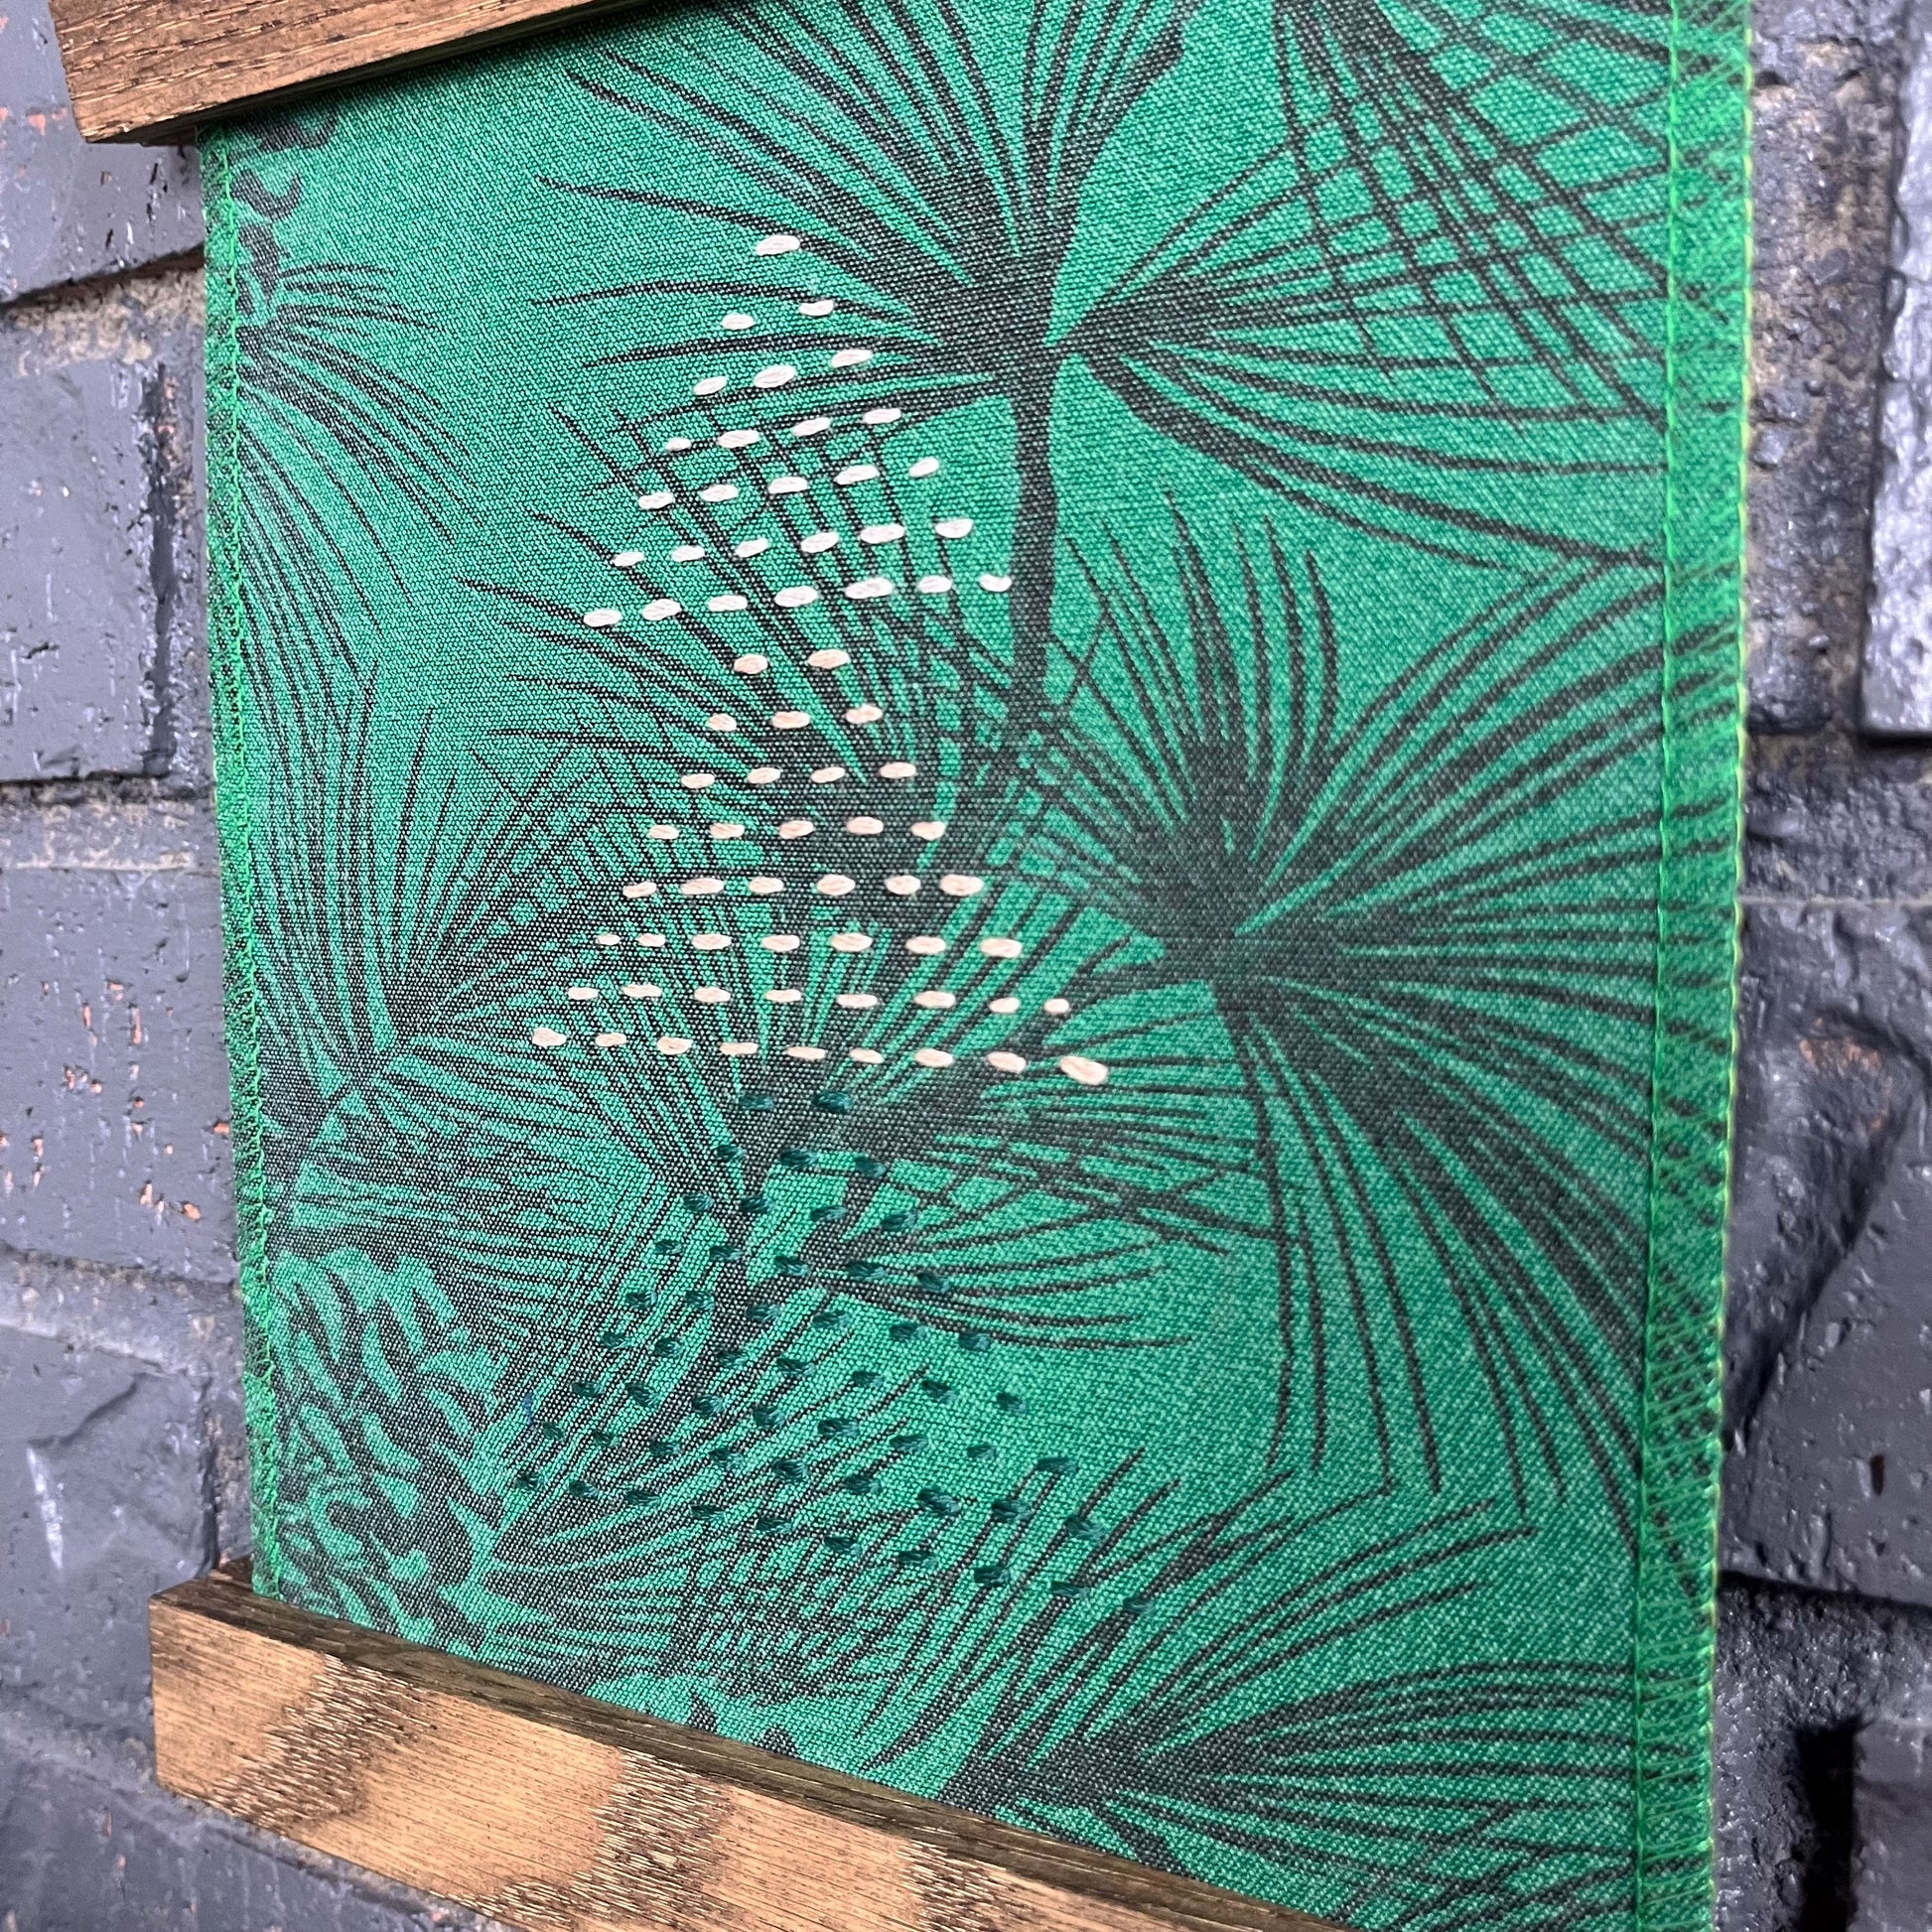 a fabric wall hanging in a magnetic wood frame, made from bright green fabric with pine branches printed on it, and stitched over with Christmas trees made from three triangles, each triangle made from running stitches in green peach and ivory